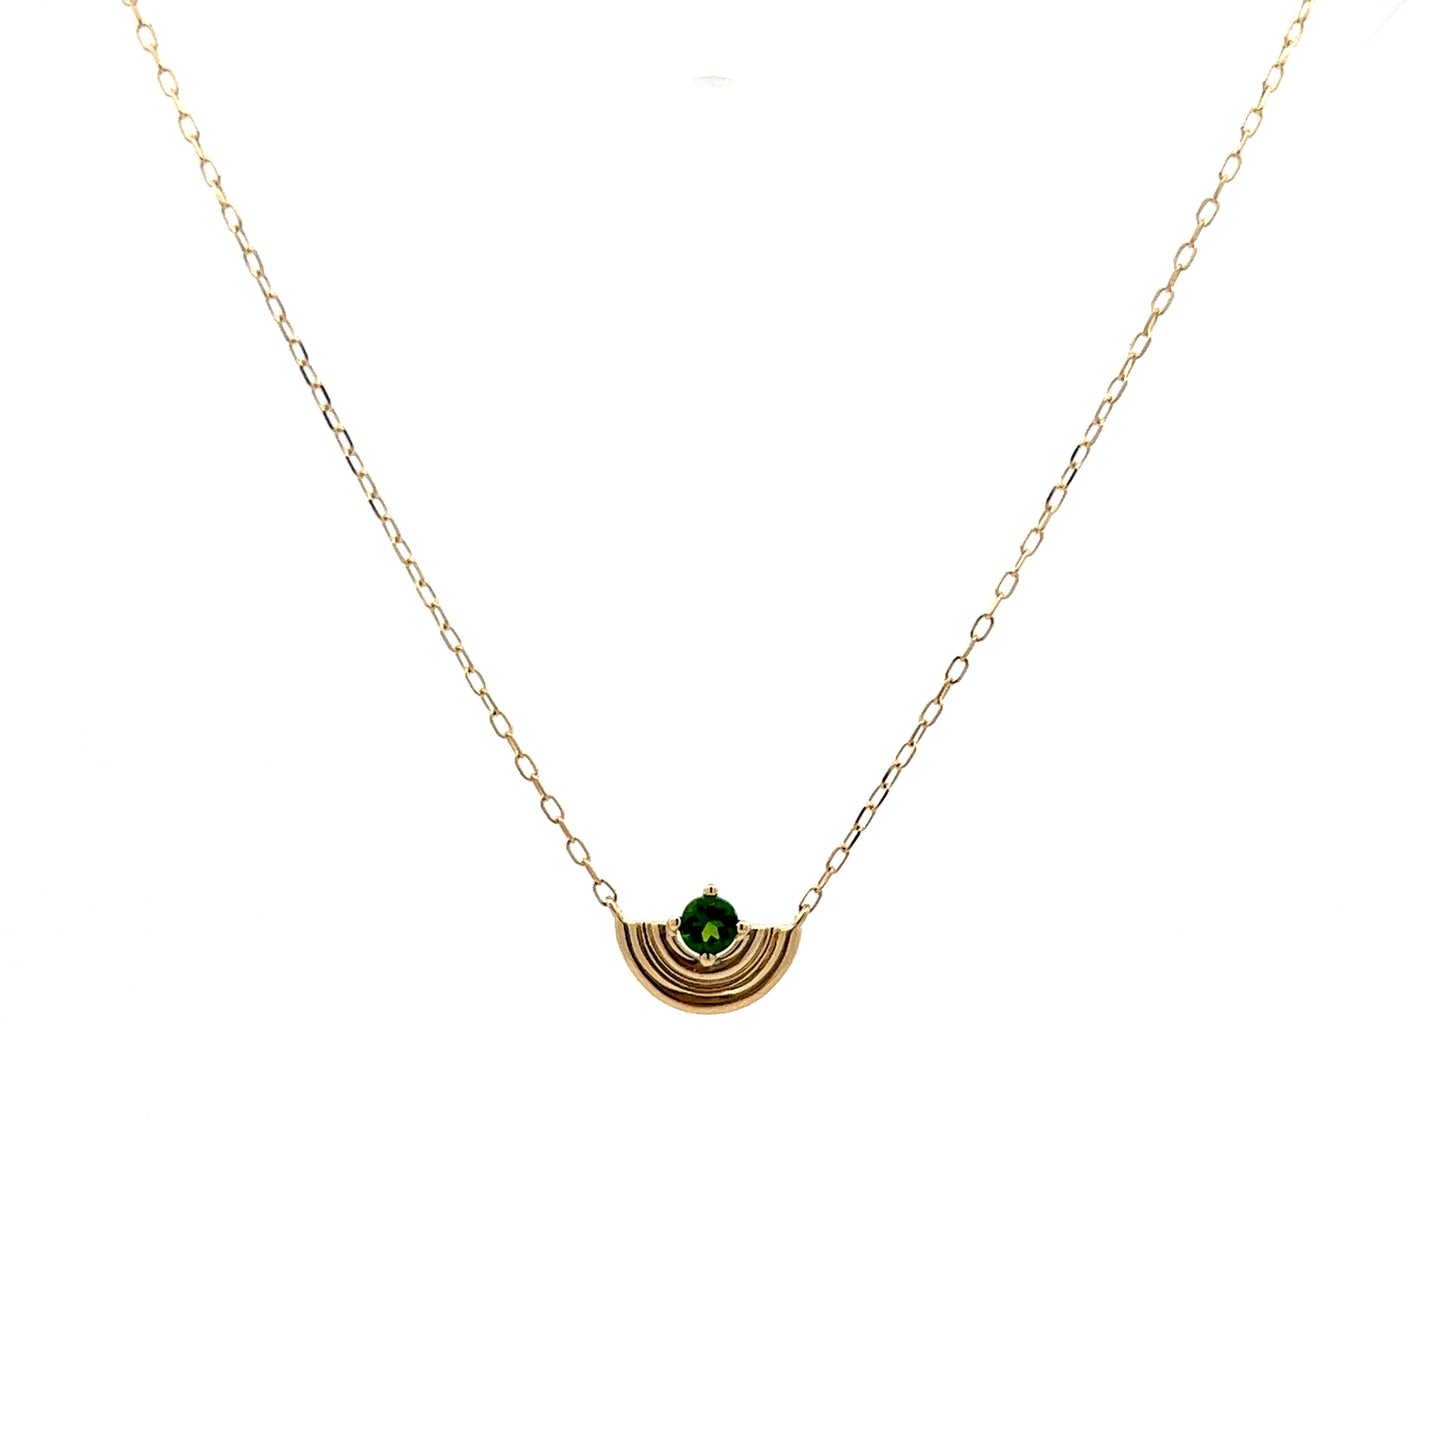 .14 Chrome Diopside Pendant Necklace in Yellow Gold